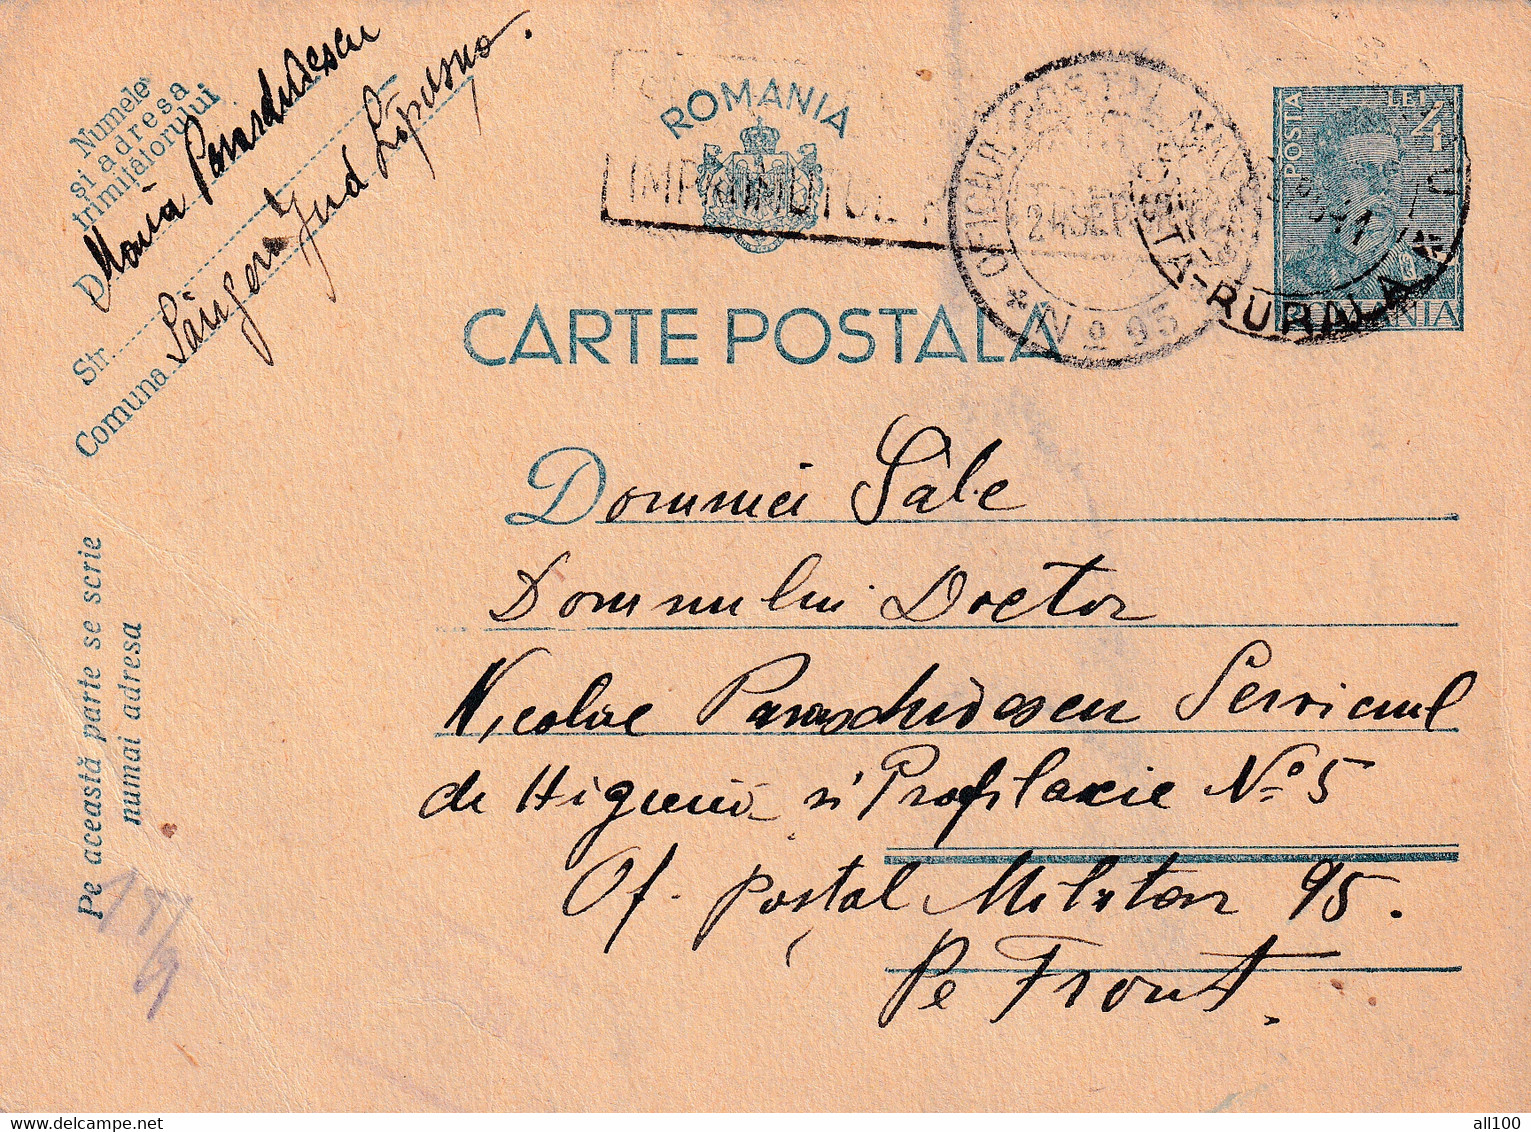 A16416 - MILITARY LETTER CENZURAT CENZORED BUCURESTI SENT TO PE FRON OFICUL MILITAR NR. 95   POSTAL STATIONERY 1941 - 2. Weltkrieg (Briefe)